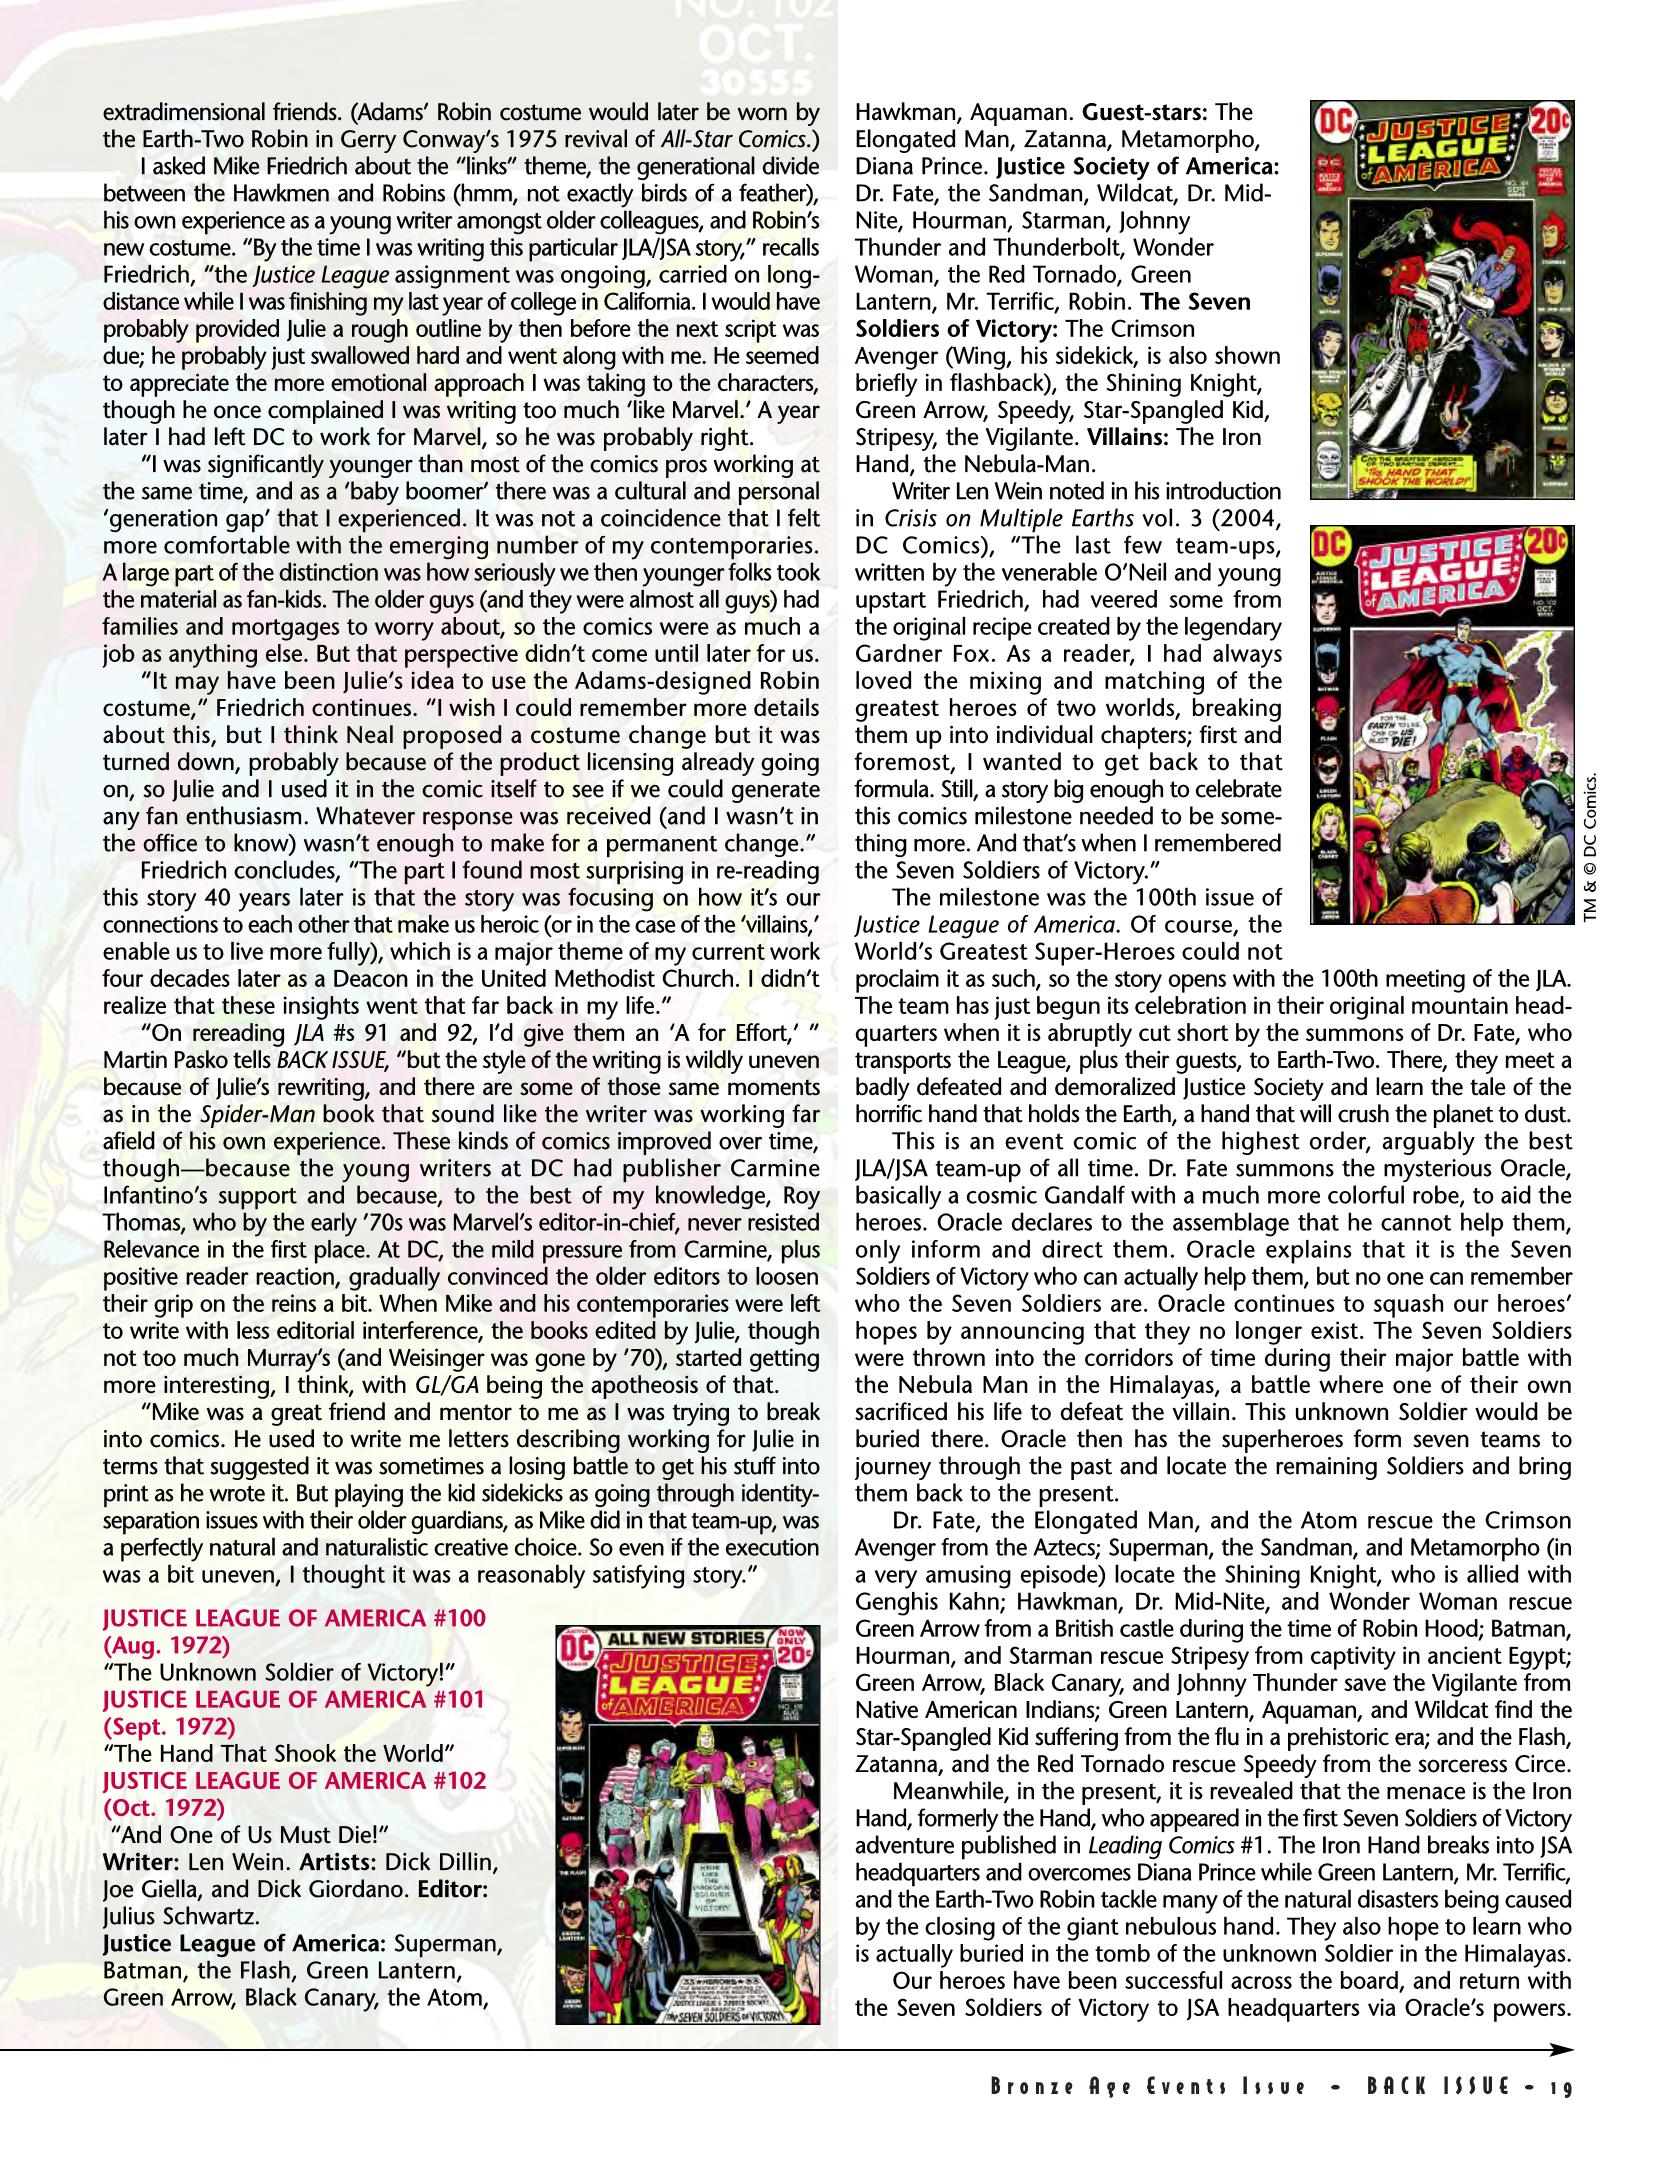 Read online Back Issue comic -  Issue #82 - 21